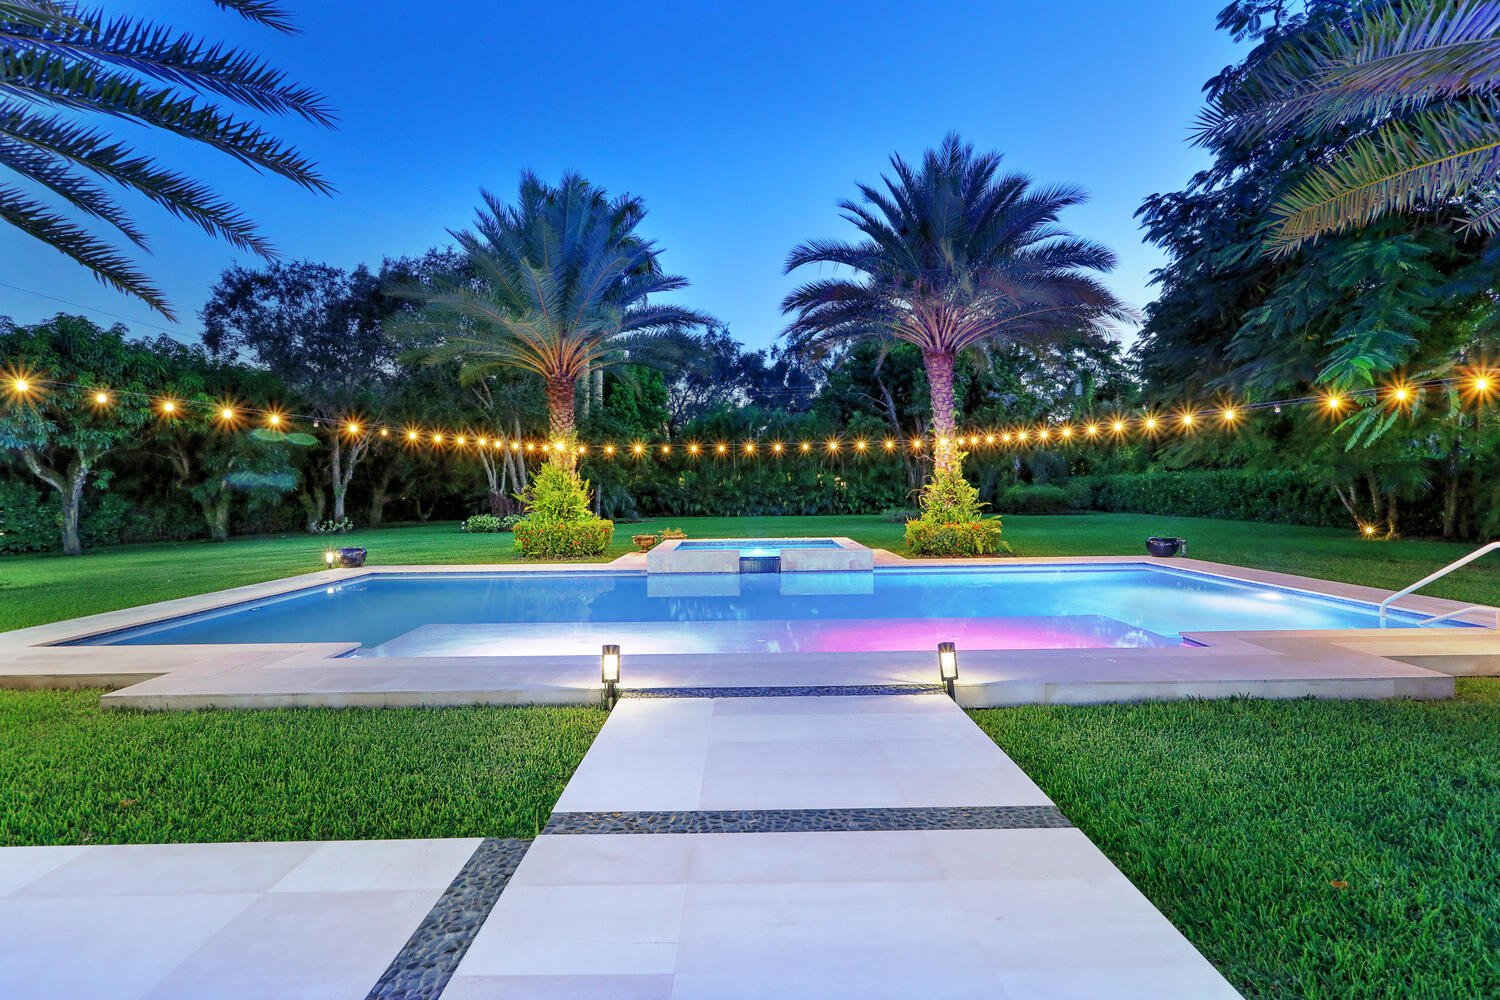 Master Brokers Forum Listing: Check Out This 'Hamptons Meets Key West' Style North Pinecrest Home Asking $5.8 Million 23.jpg